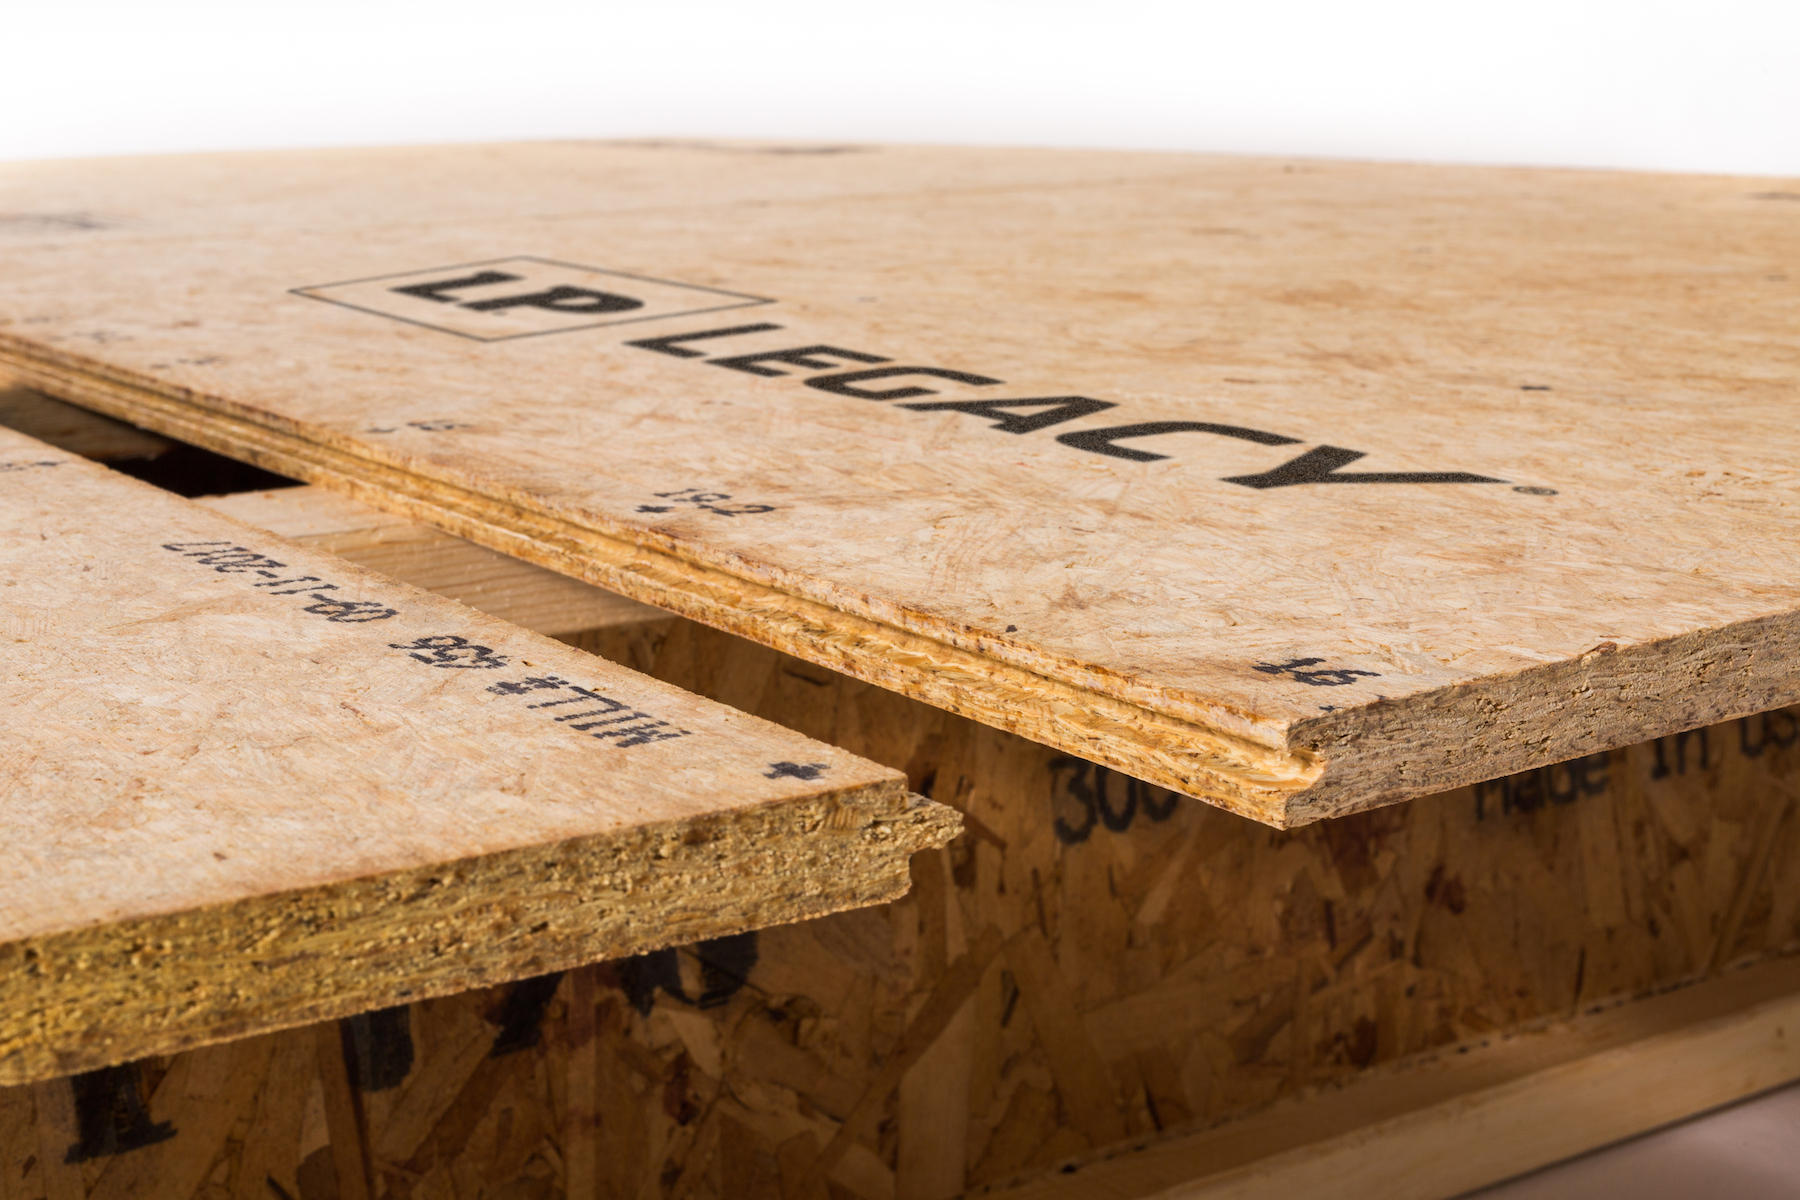 Using a premium sub-floor such as LP Legacy® as part of a well-planned system can help builders meet buyer expectations for floor performance.